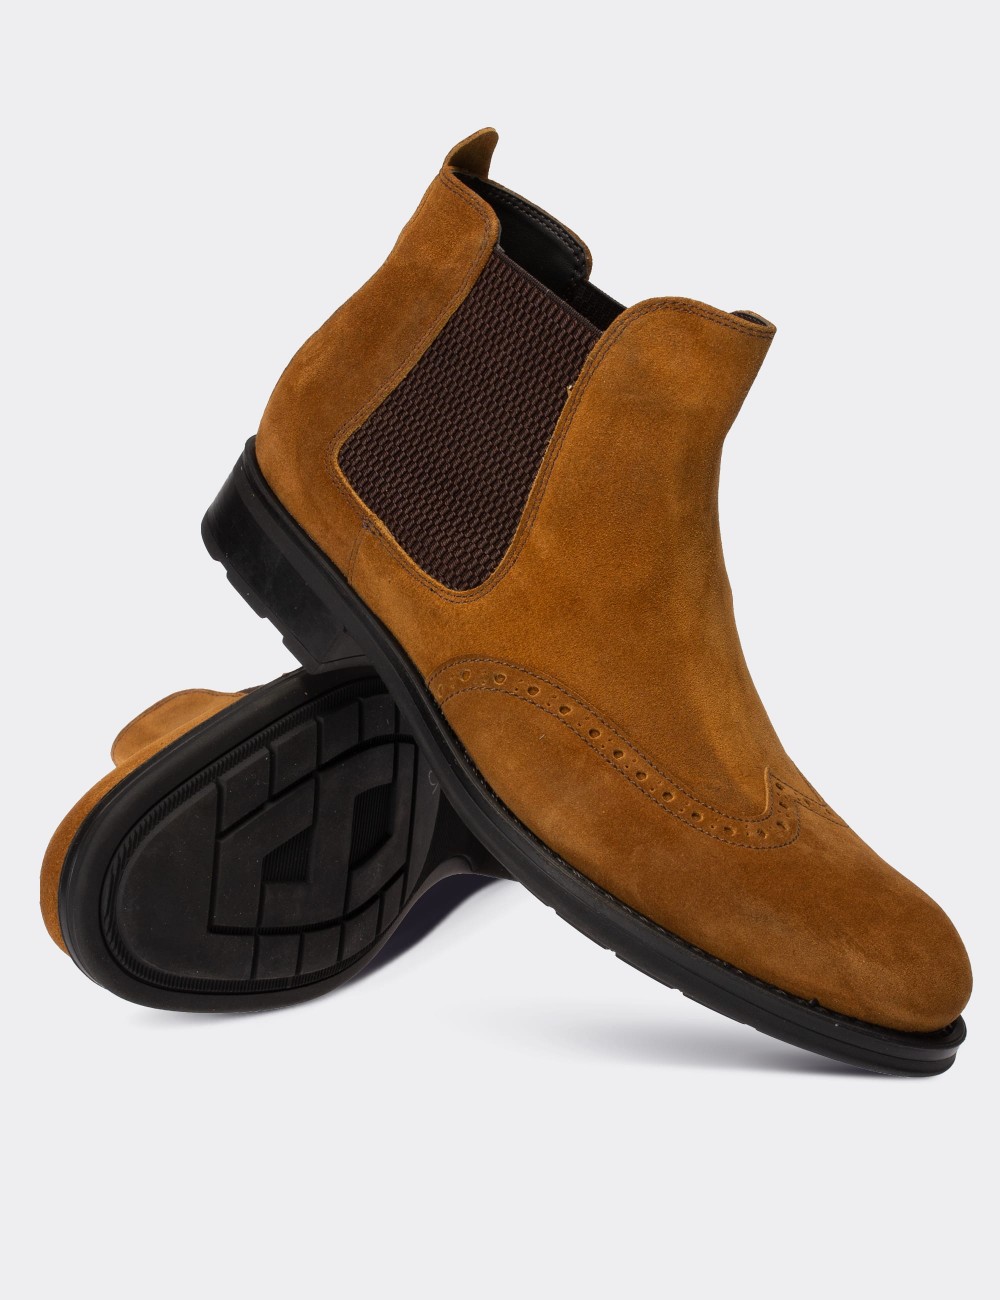 Tan Suede Leather Chelsea Boots - 01622MTBAC03